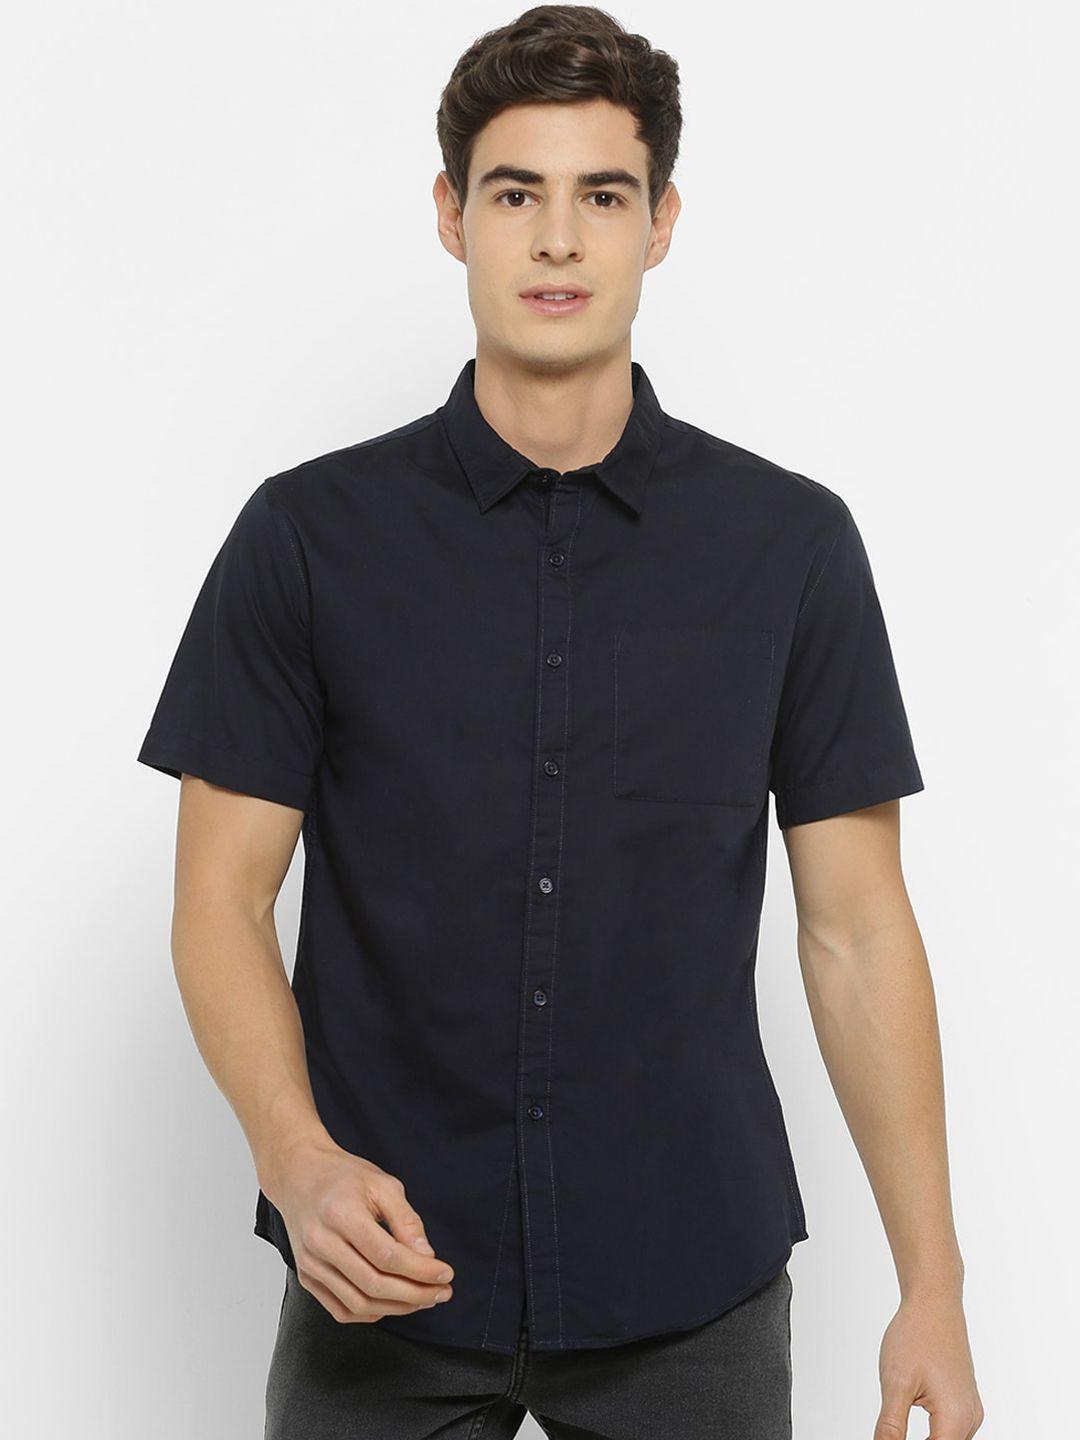 forever 21 men navy blue slim fit solid casual shirt